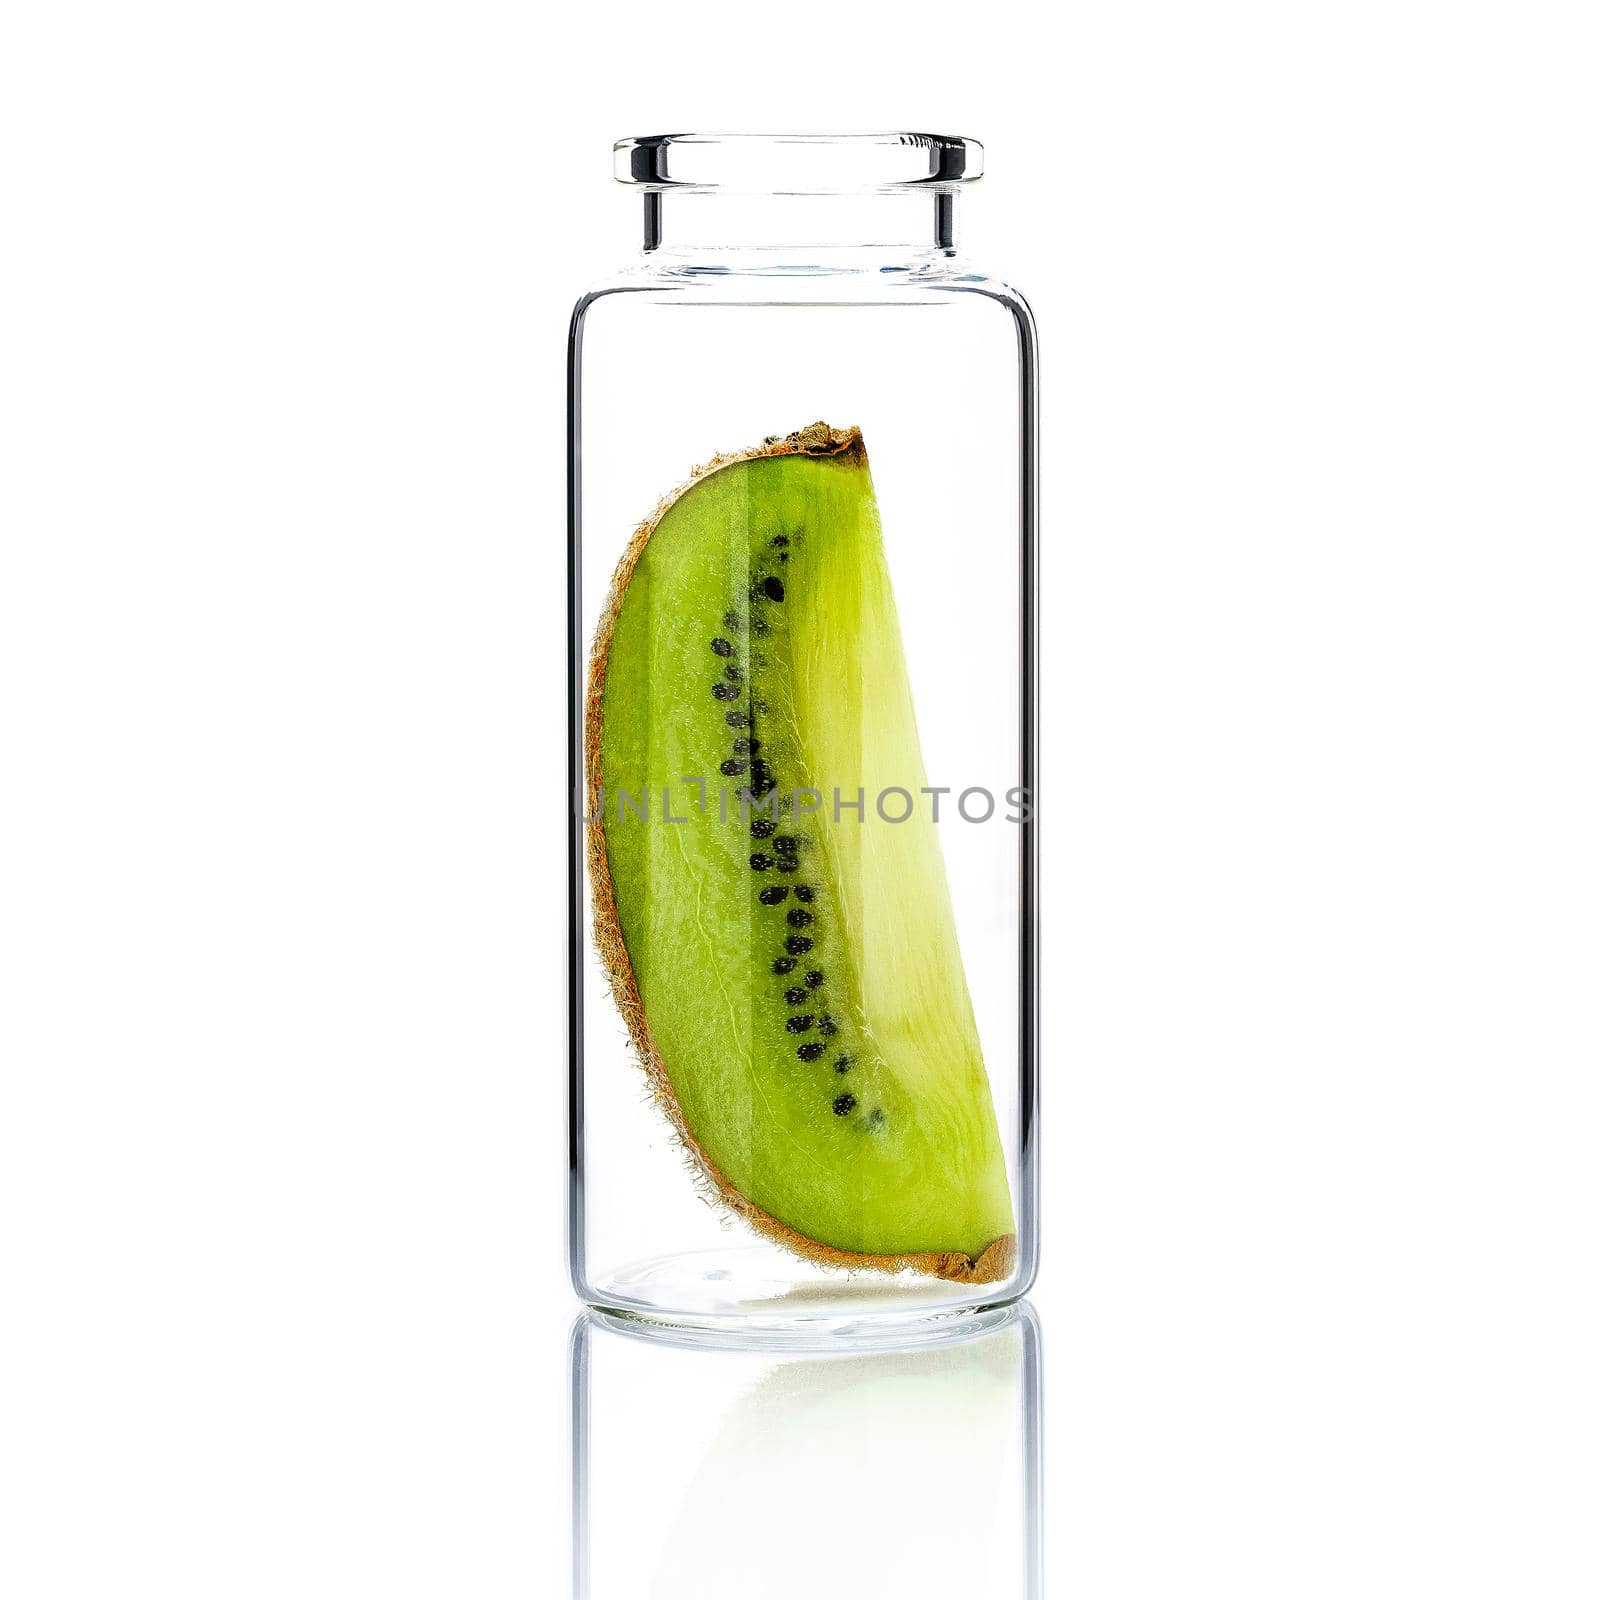  Homemade skin care with kiwi  slice in  glass bottle  isolated on white background.